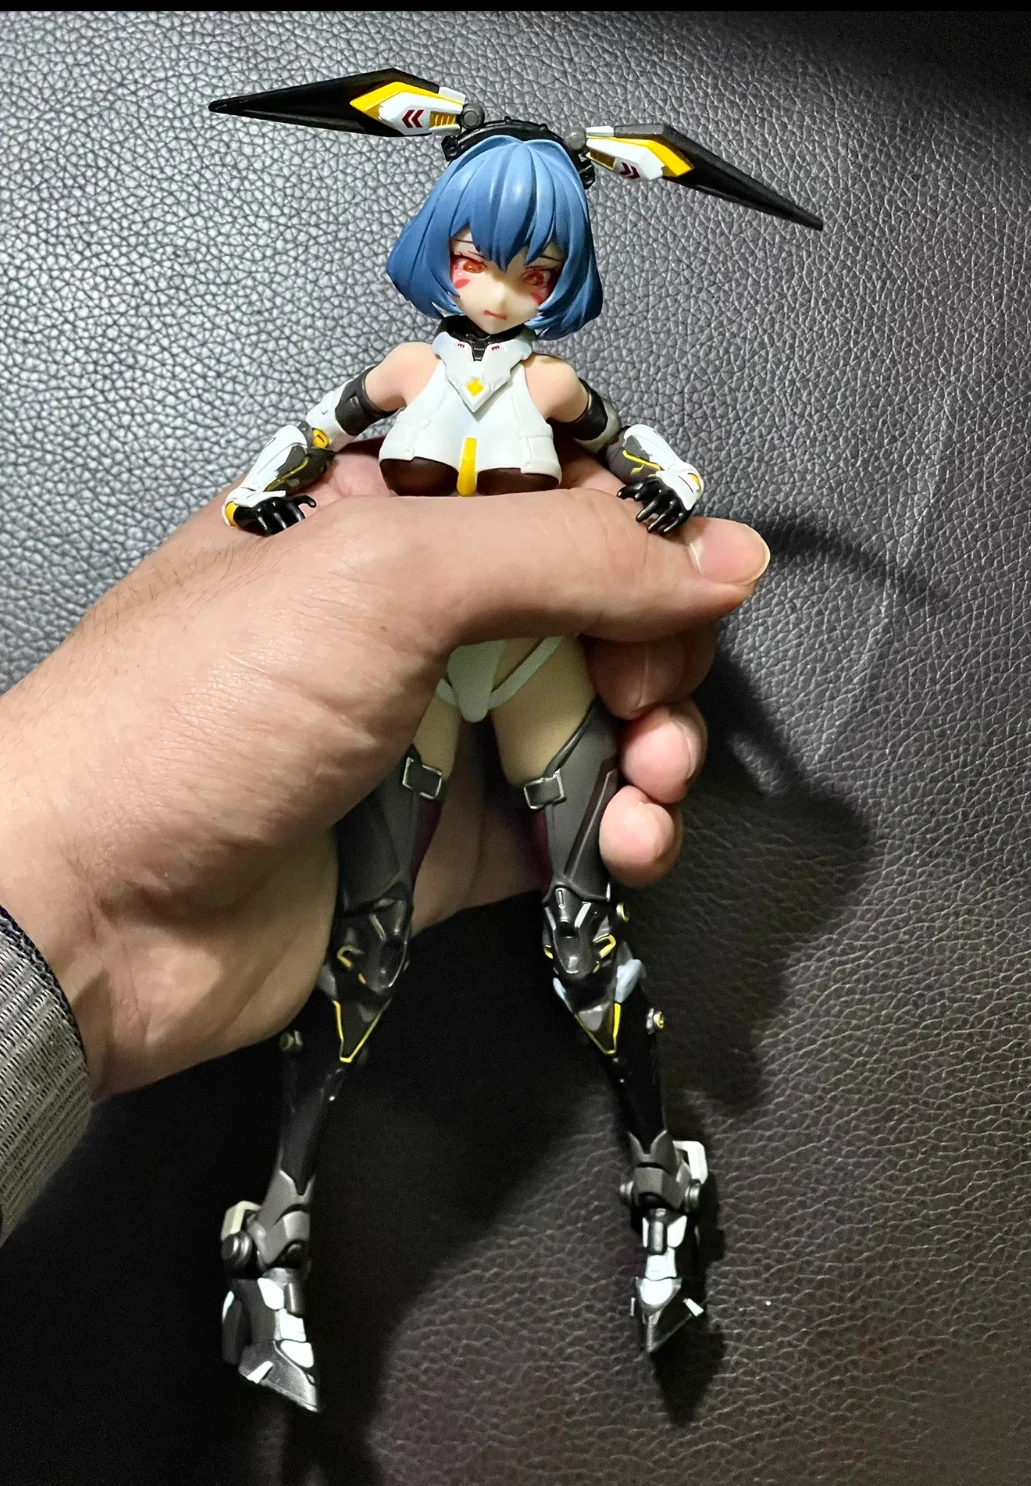 

Original Girl Anime Assembly Animester Whisky Sour Cj Editionnuclear Gold Reconstruction Limited Model Toys Mobile Suit Gifts